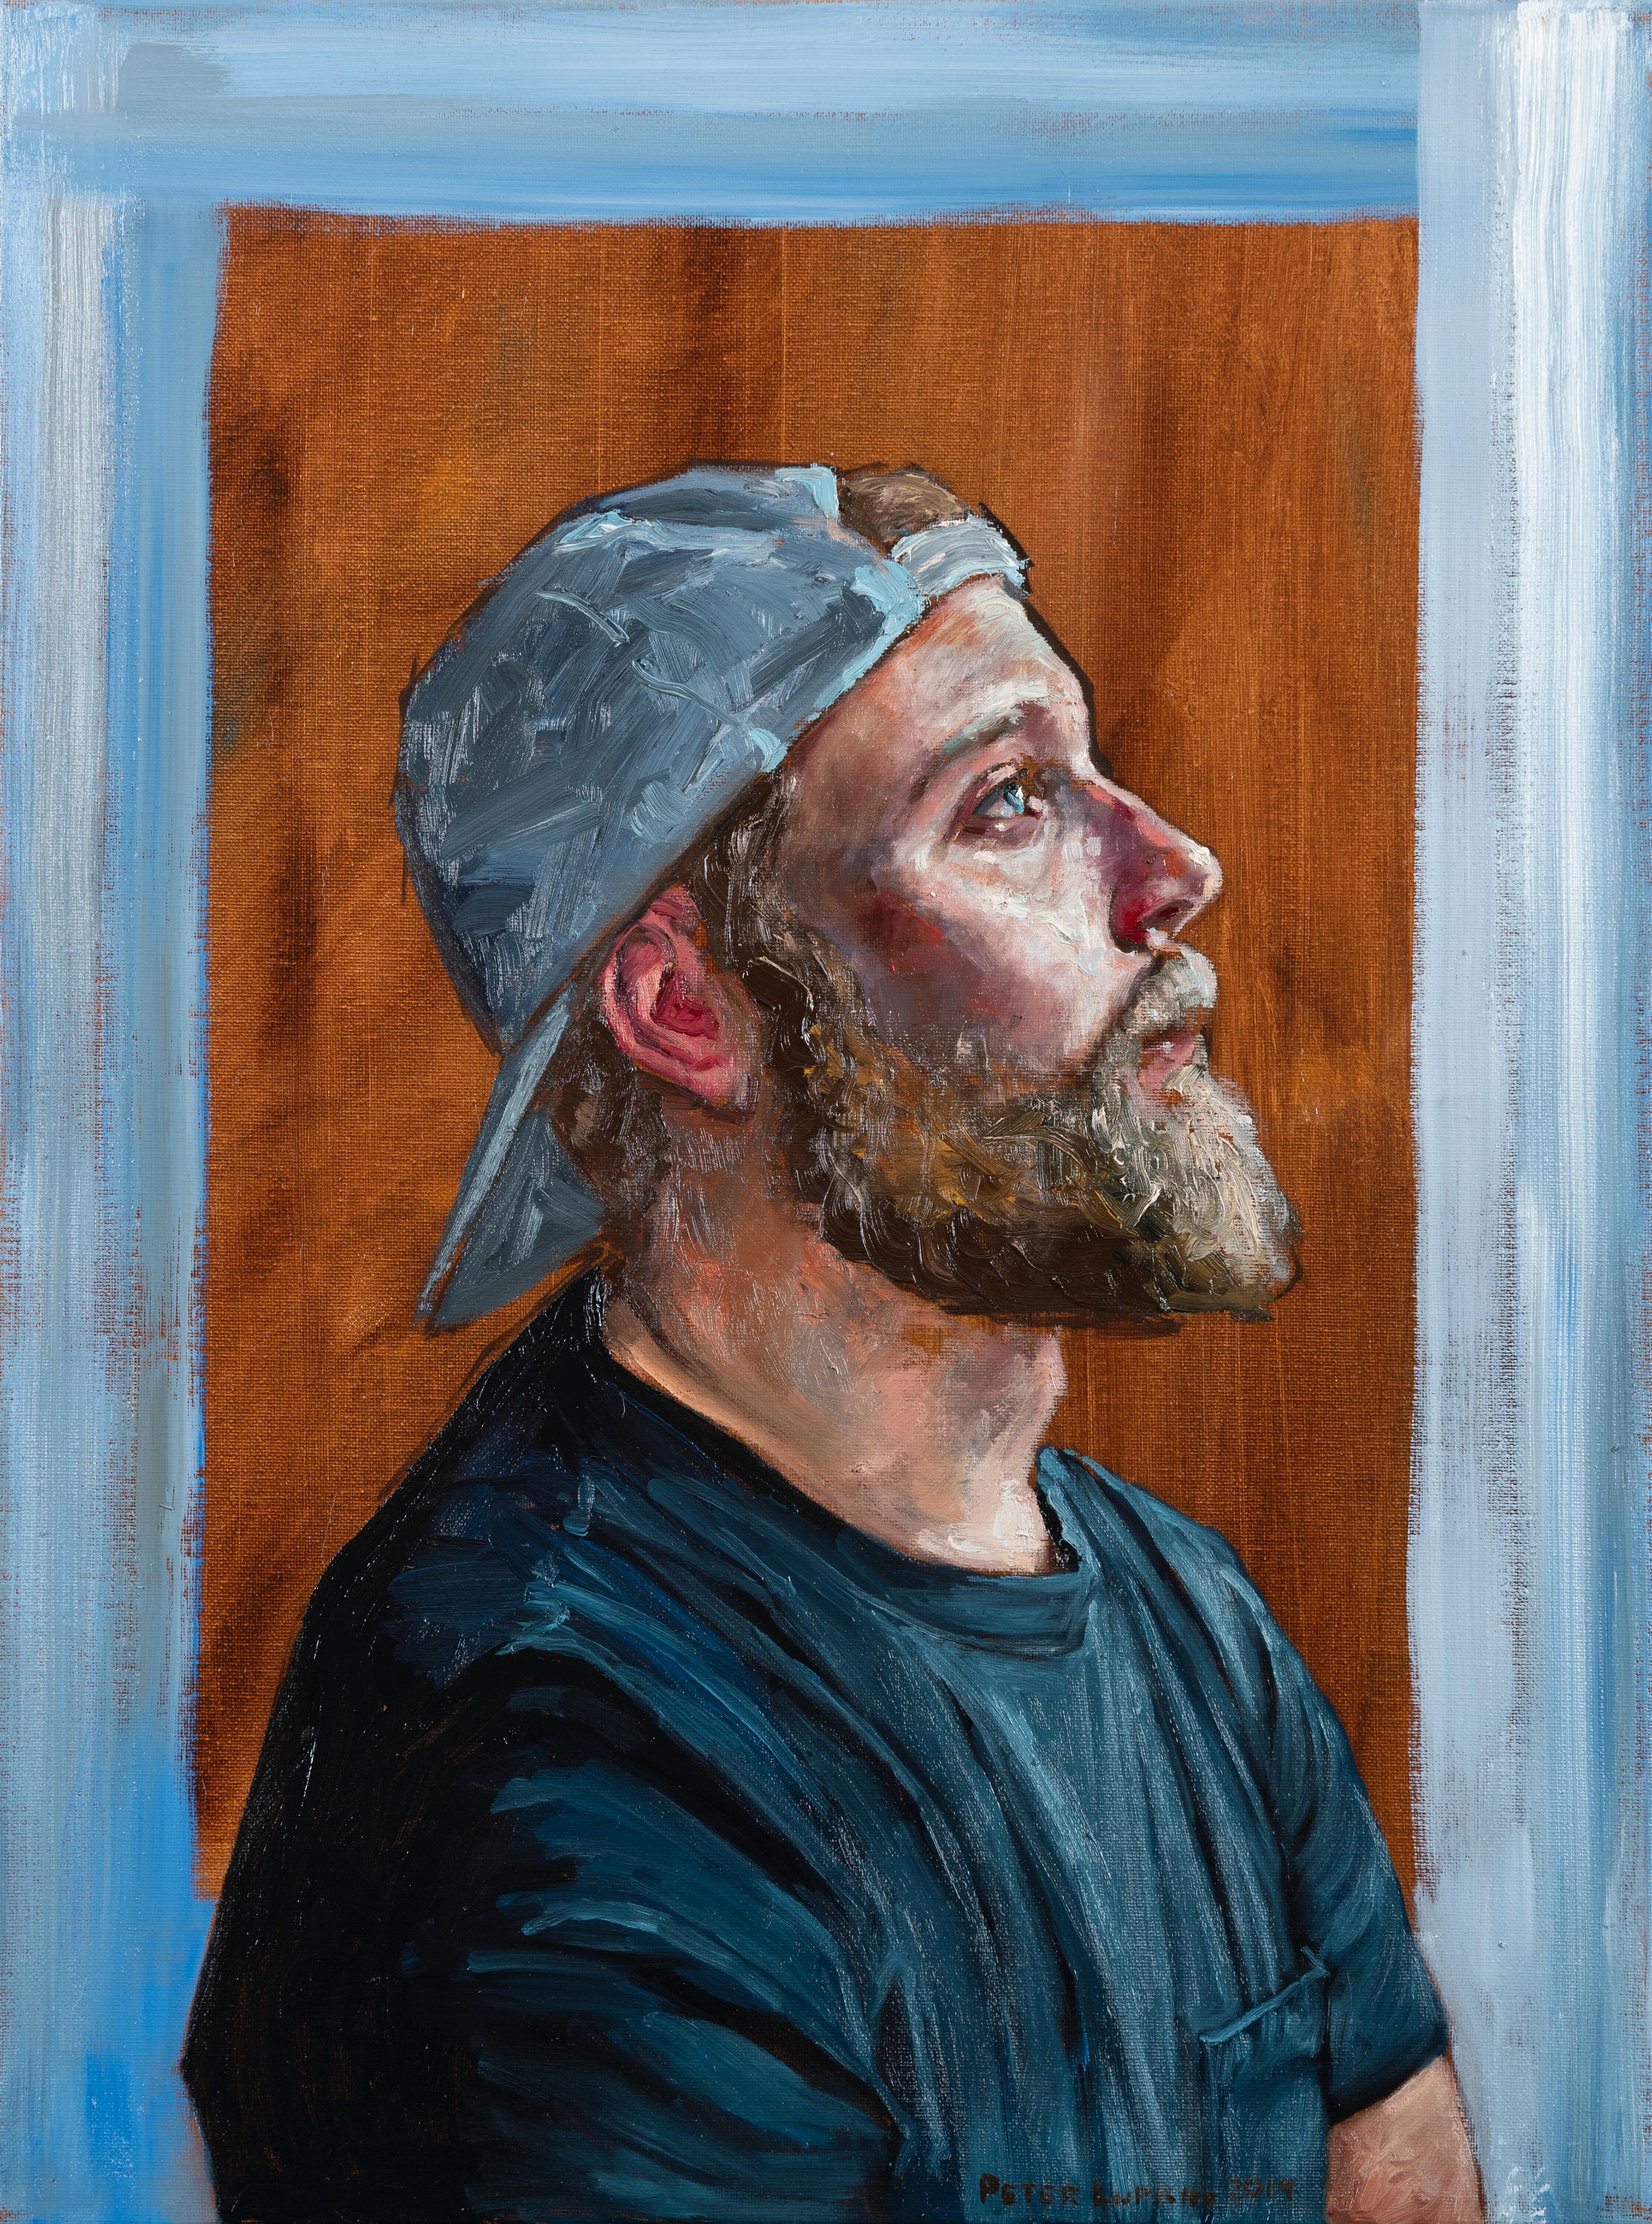 Peter Lupkin Figurative Painting - Ben - Original Oil Painting Portrait of the Artist's Brother in a Baseball Cap